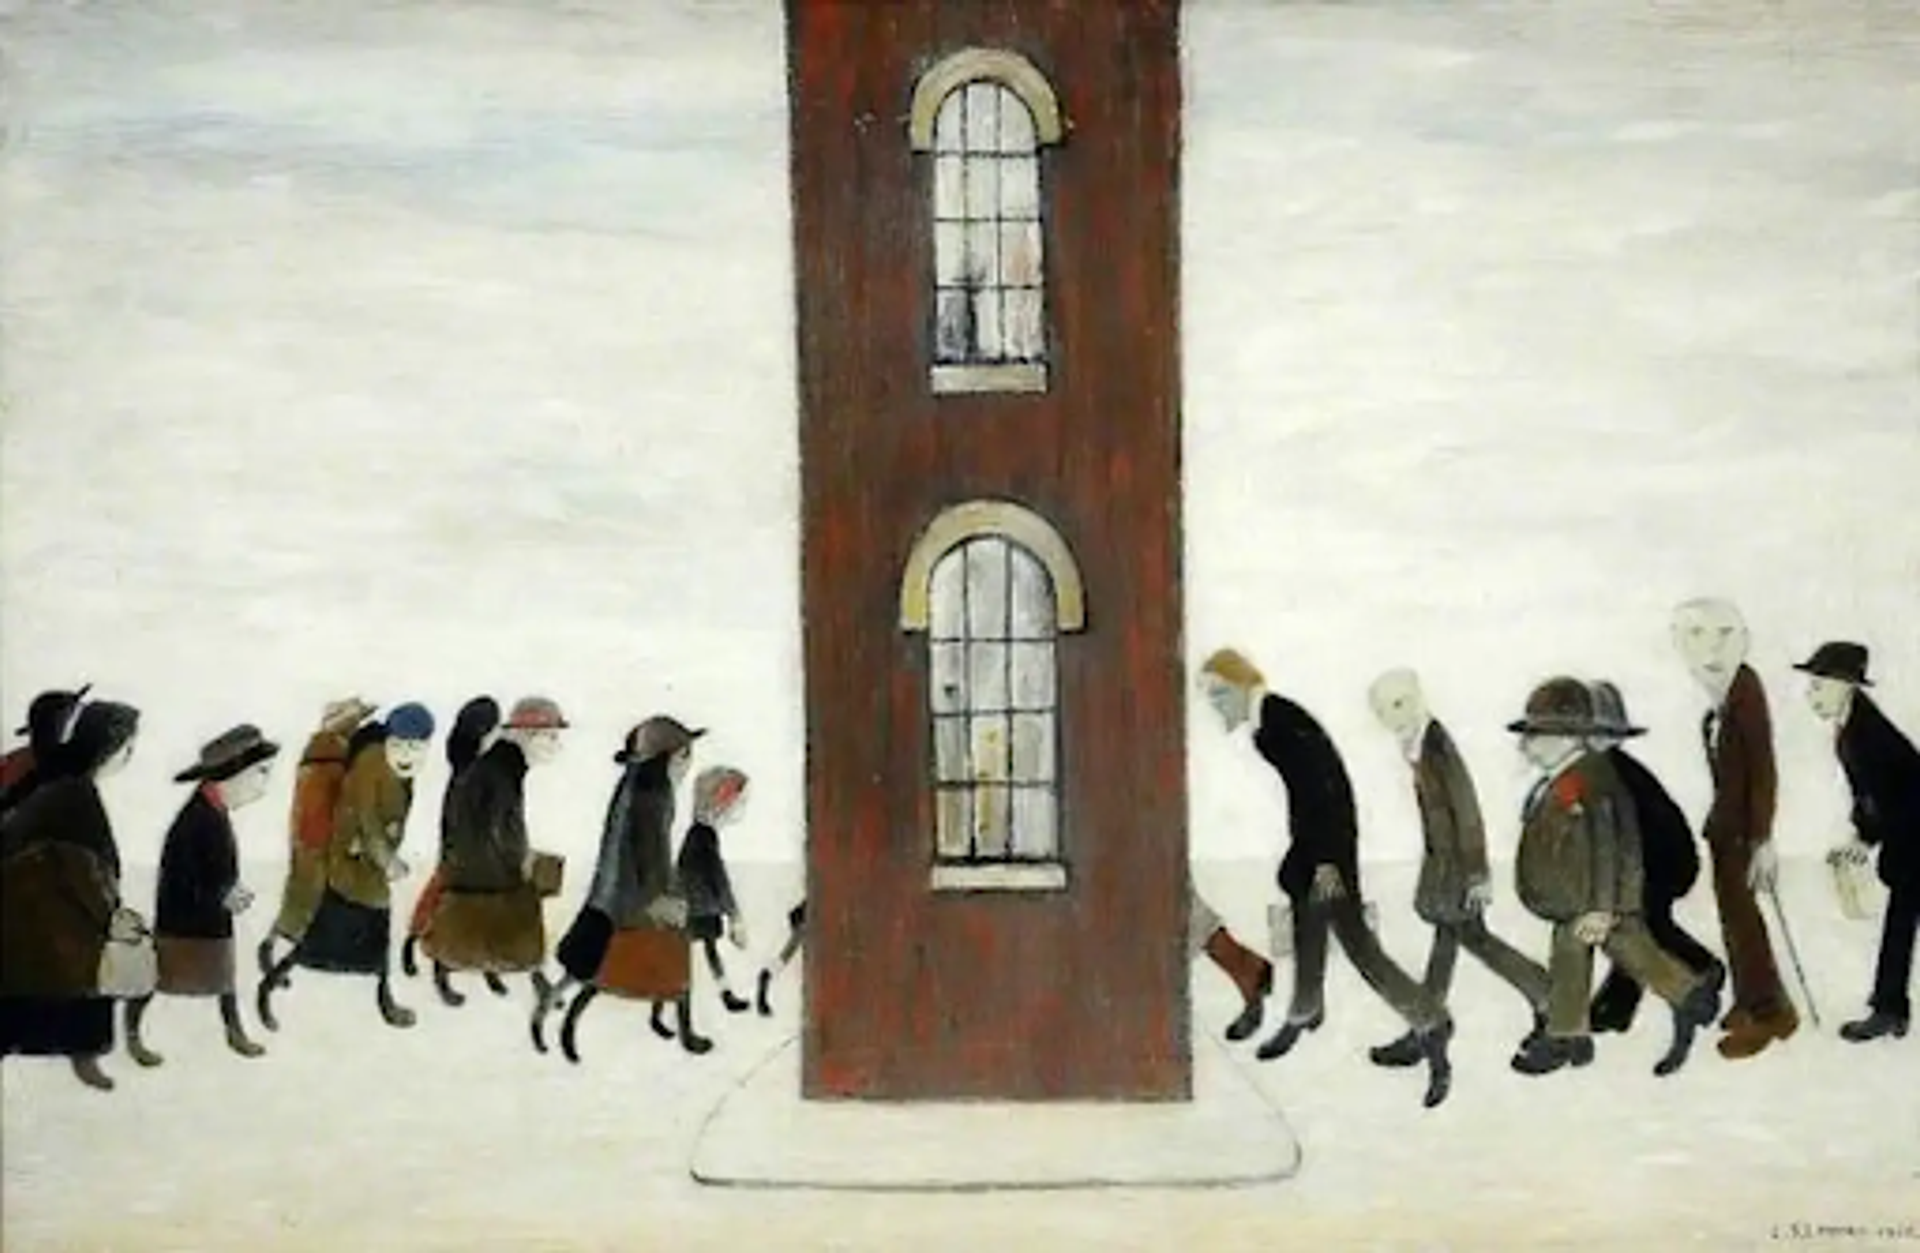 L.S. Lowry’s The Meeting Point. A lithograph of two groups of people walking into a building from opposite entrances. 